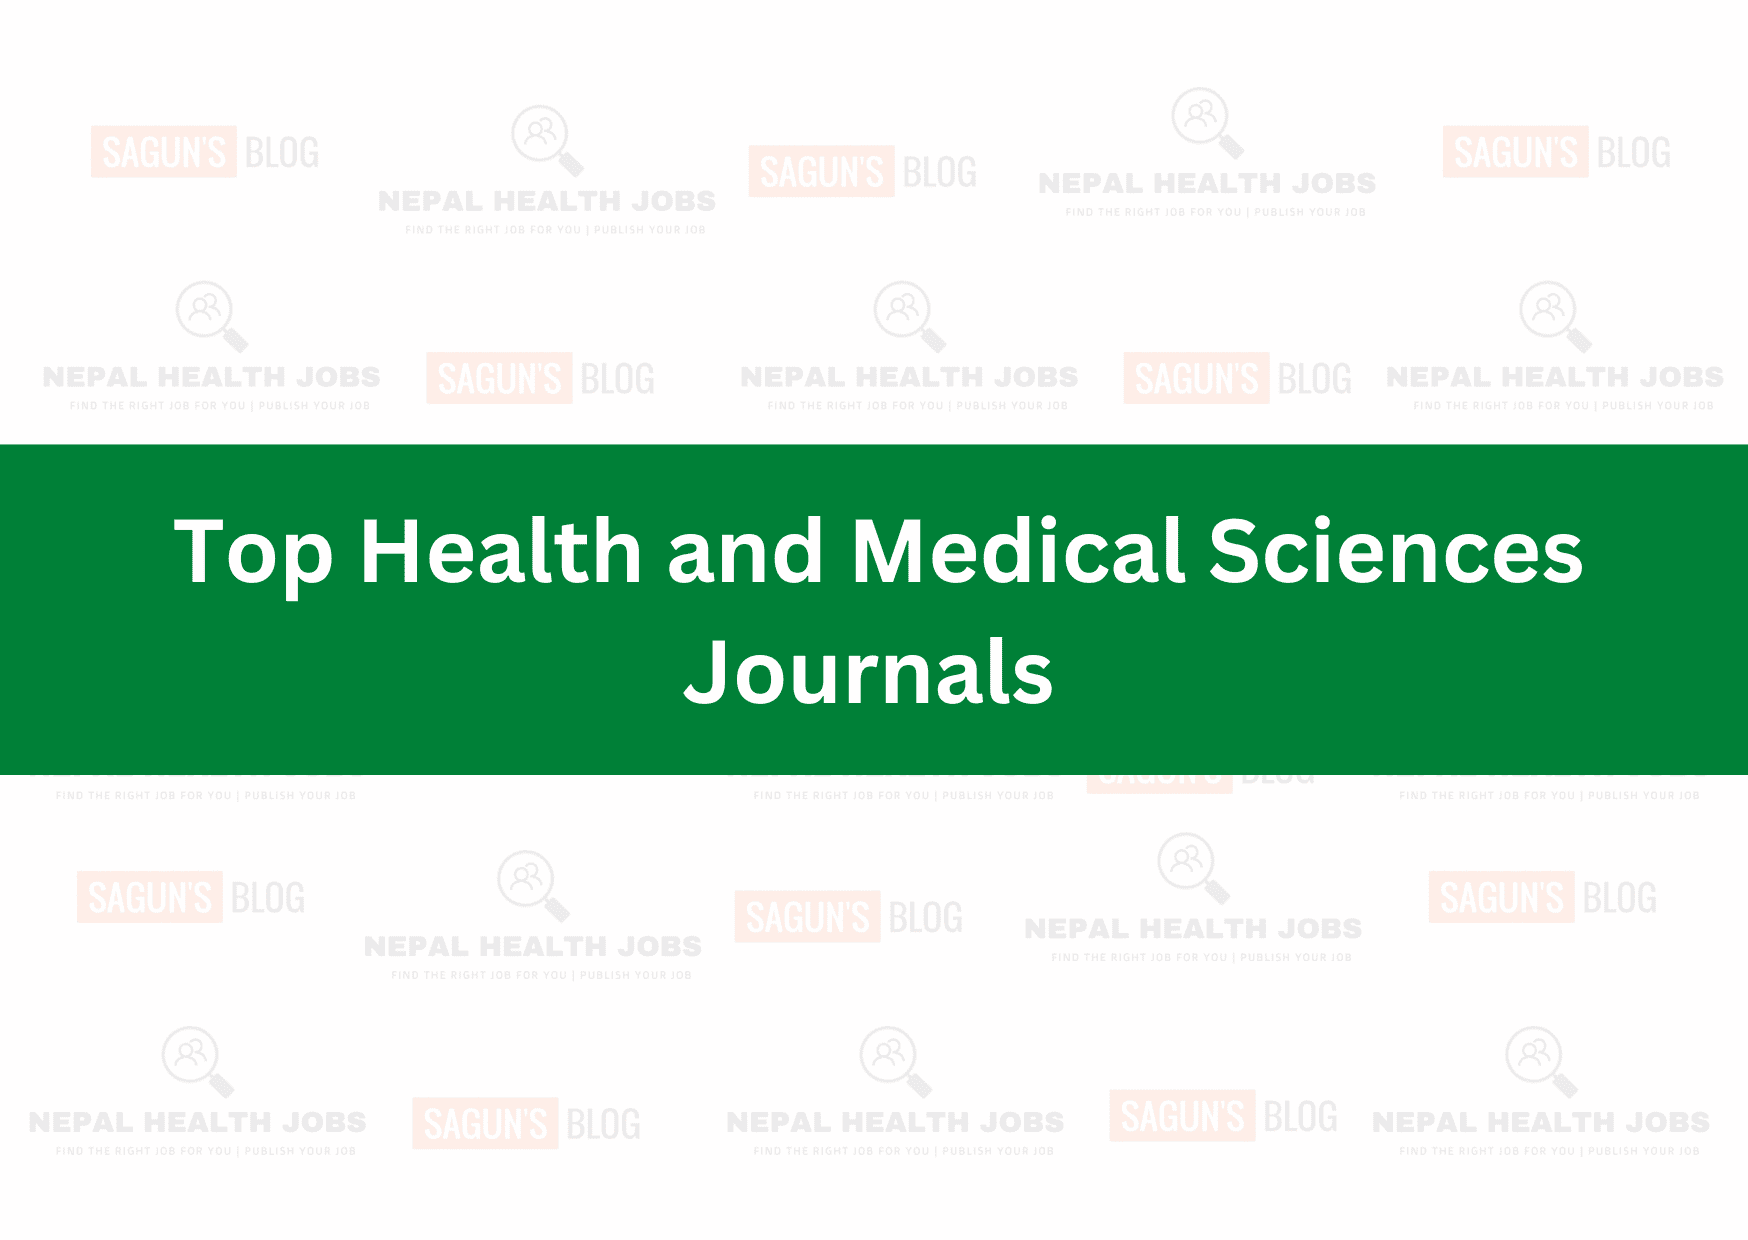 Top and Medical Sciences Journals